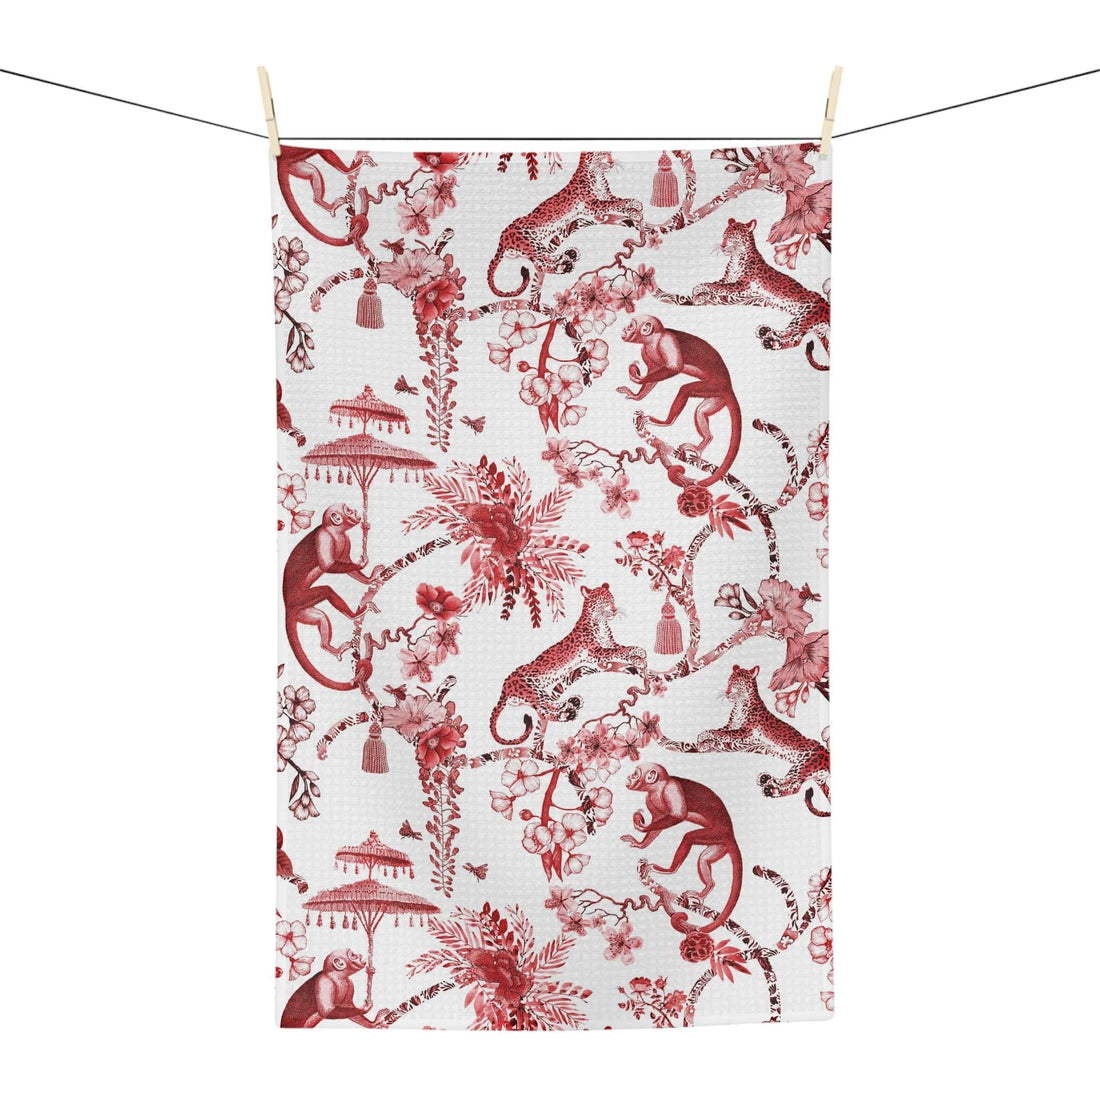 Kate McEnroe New York Chinoiserie Jungle Botanical Toile Tea Towel, Red, White Chinoiserie Floral Kitchen Linens , Country Farmhouse Table Decor - 131582623Tea Towels27492443116252275610